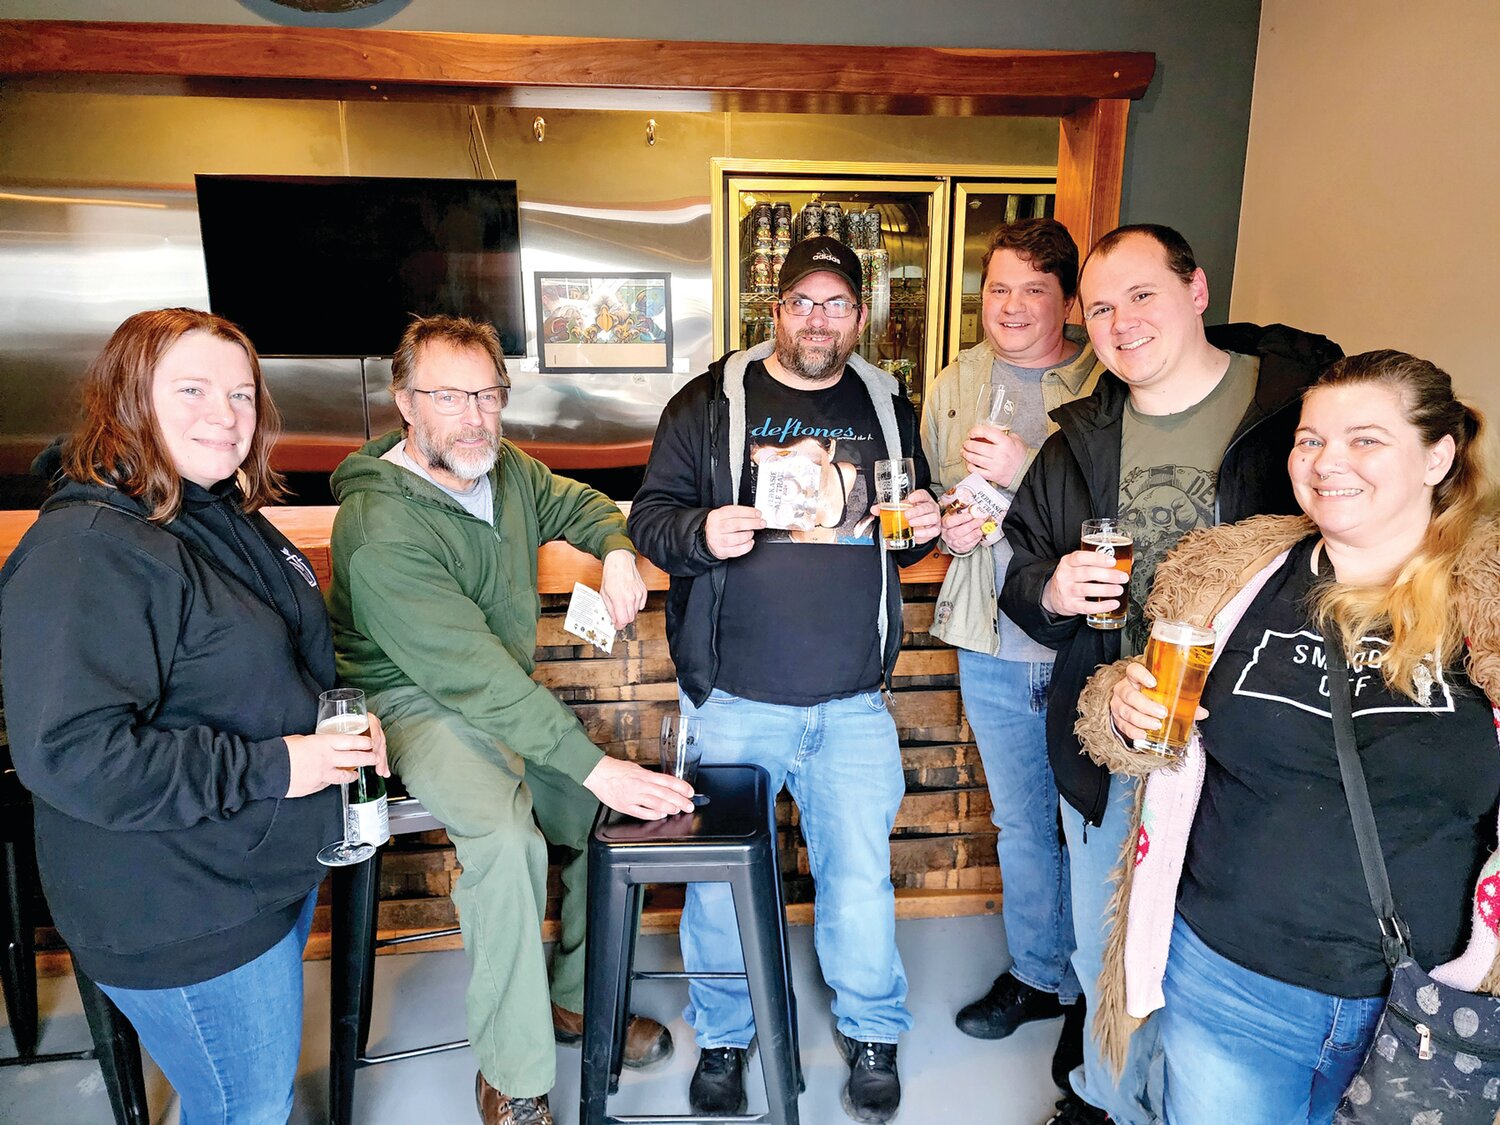 Tara Lippincott of Coopersburg meets her friends from all over Bucks County at Free Will Brewing Co. to enjoy Perkasie Ale Trail on Jan. 27.